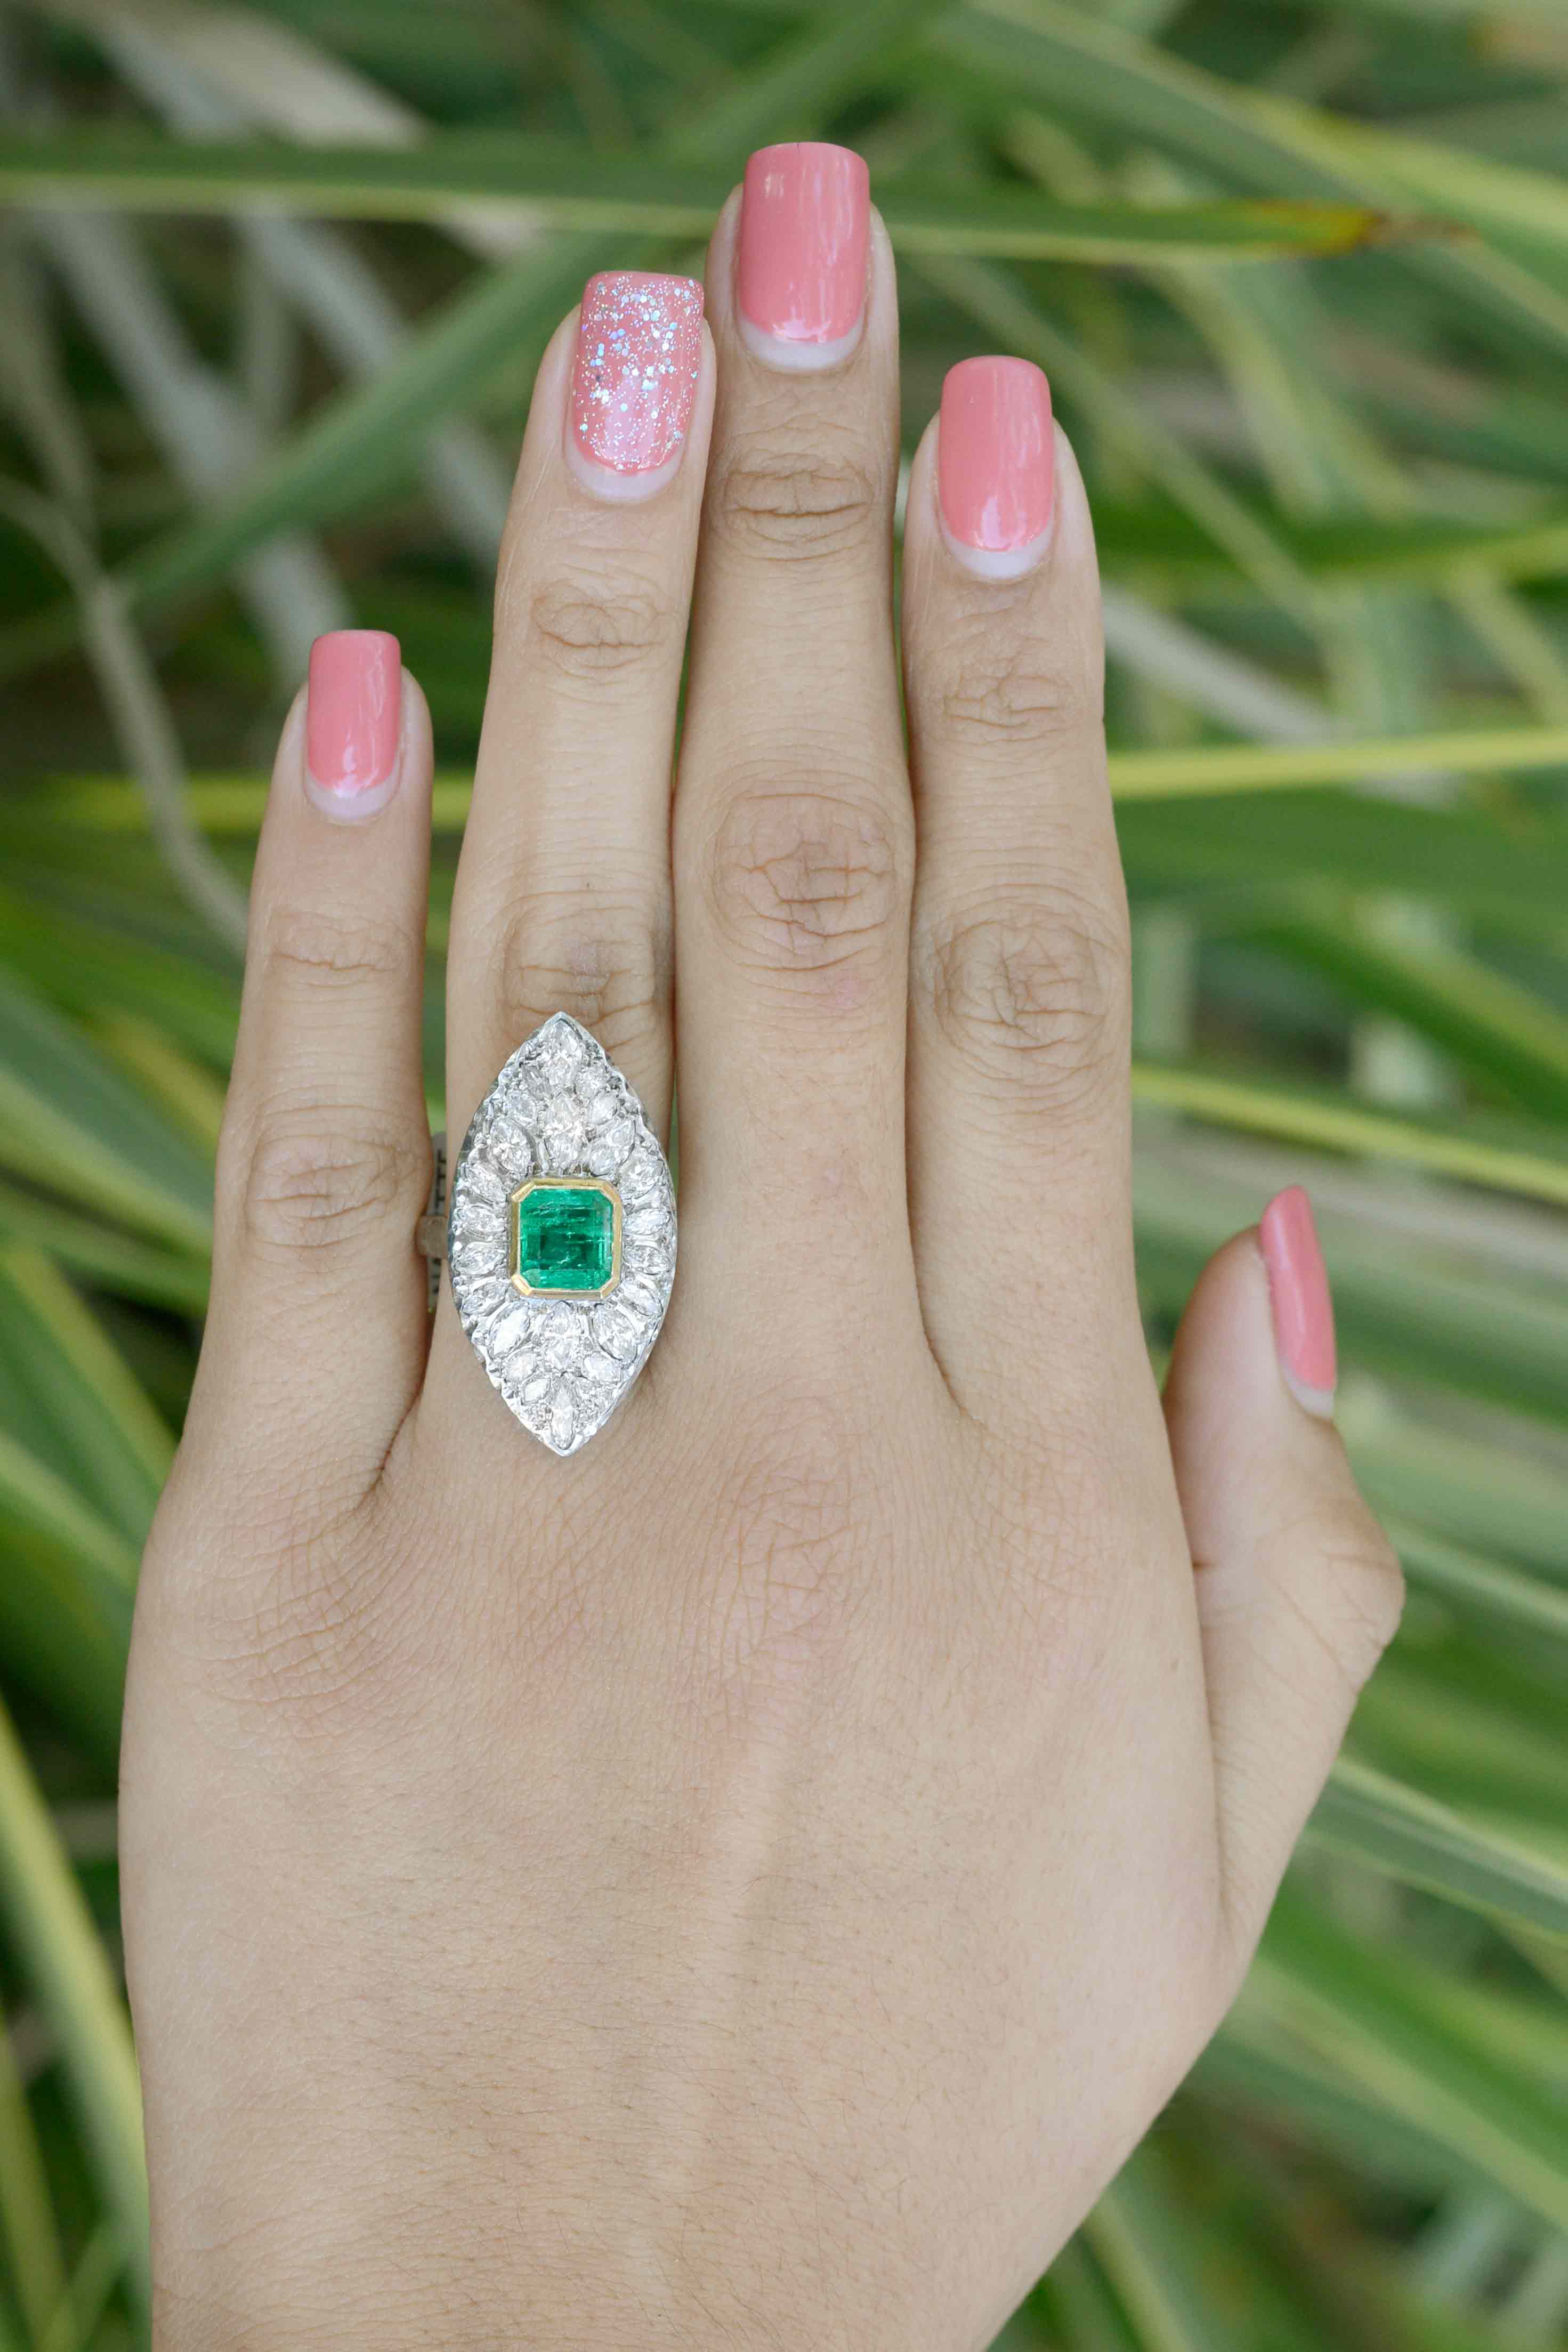 A two carat emerald and diamonds boat shaped statement ring.